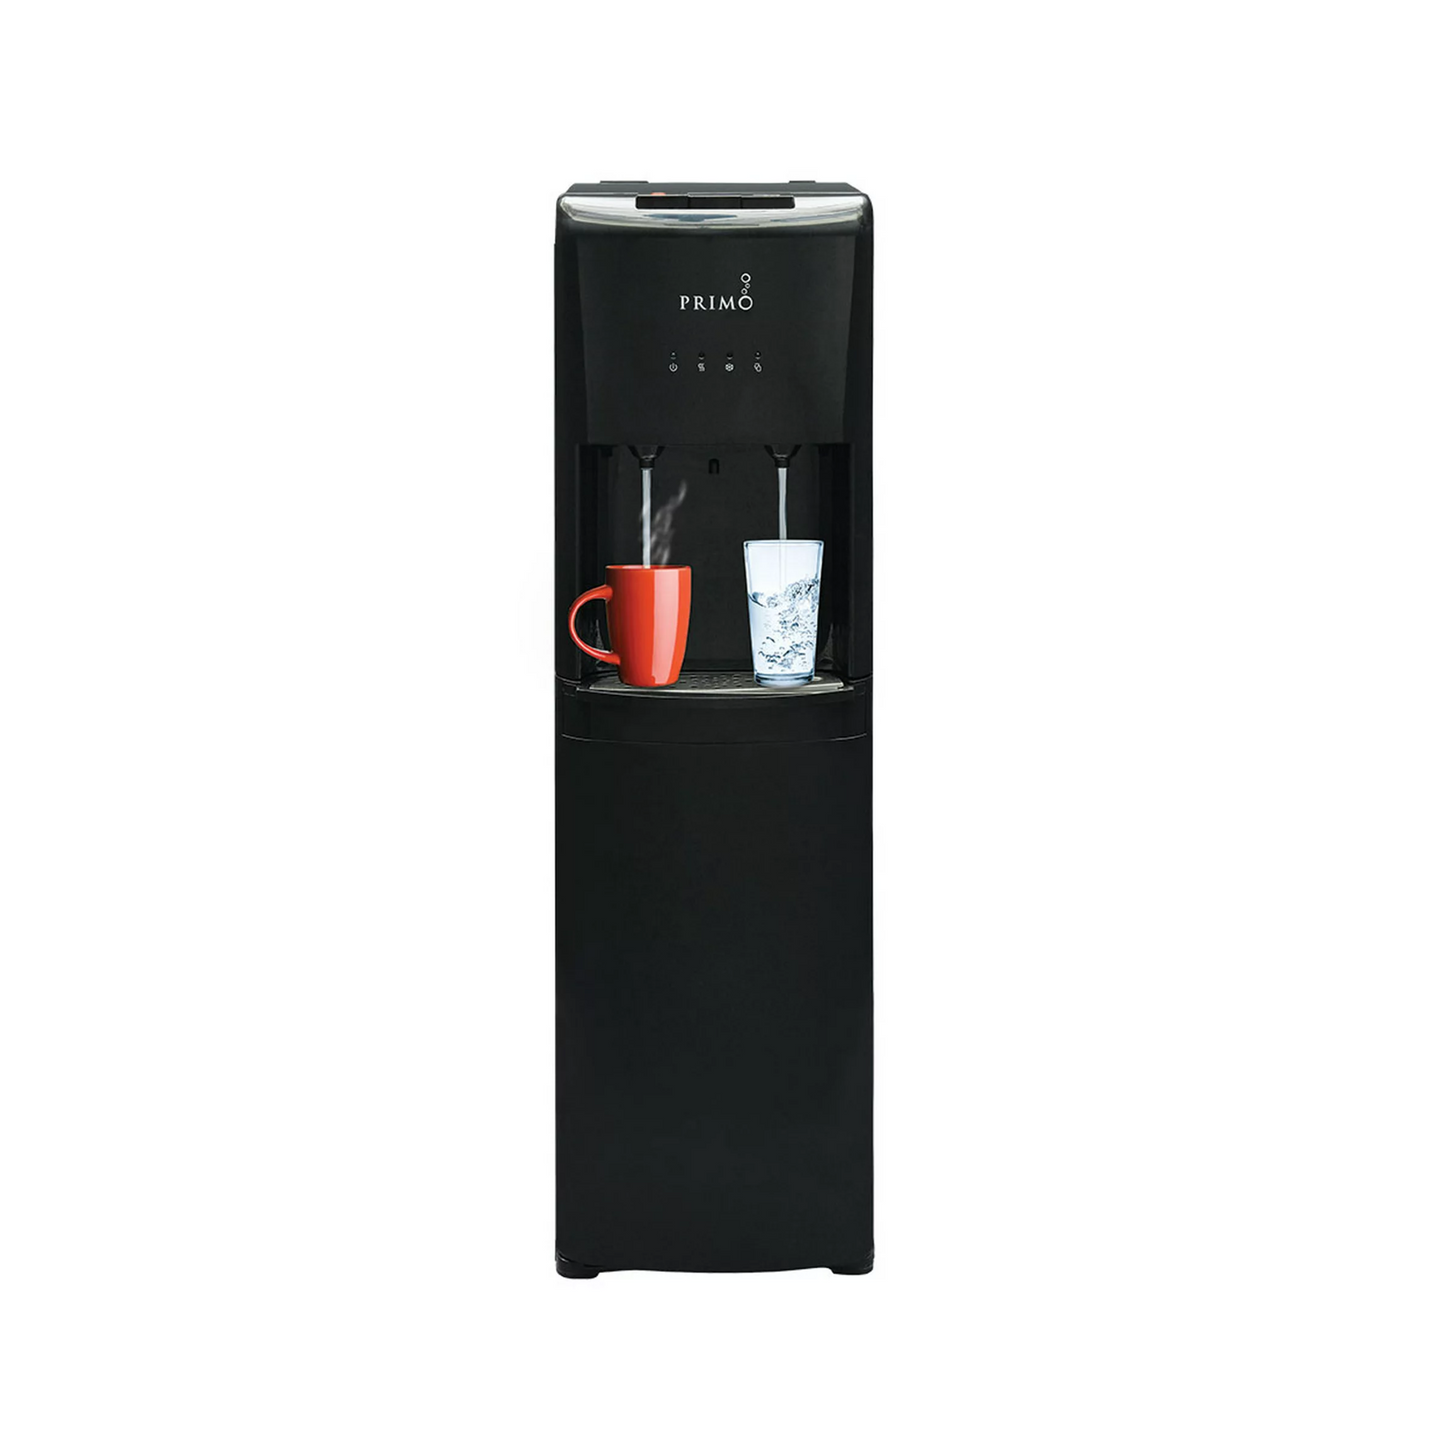 Primo Hot and Cold Water Dispenser with Bottom Loading Feature in Sleek Black